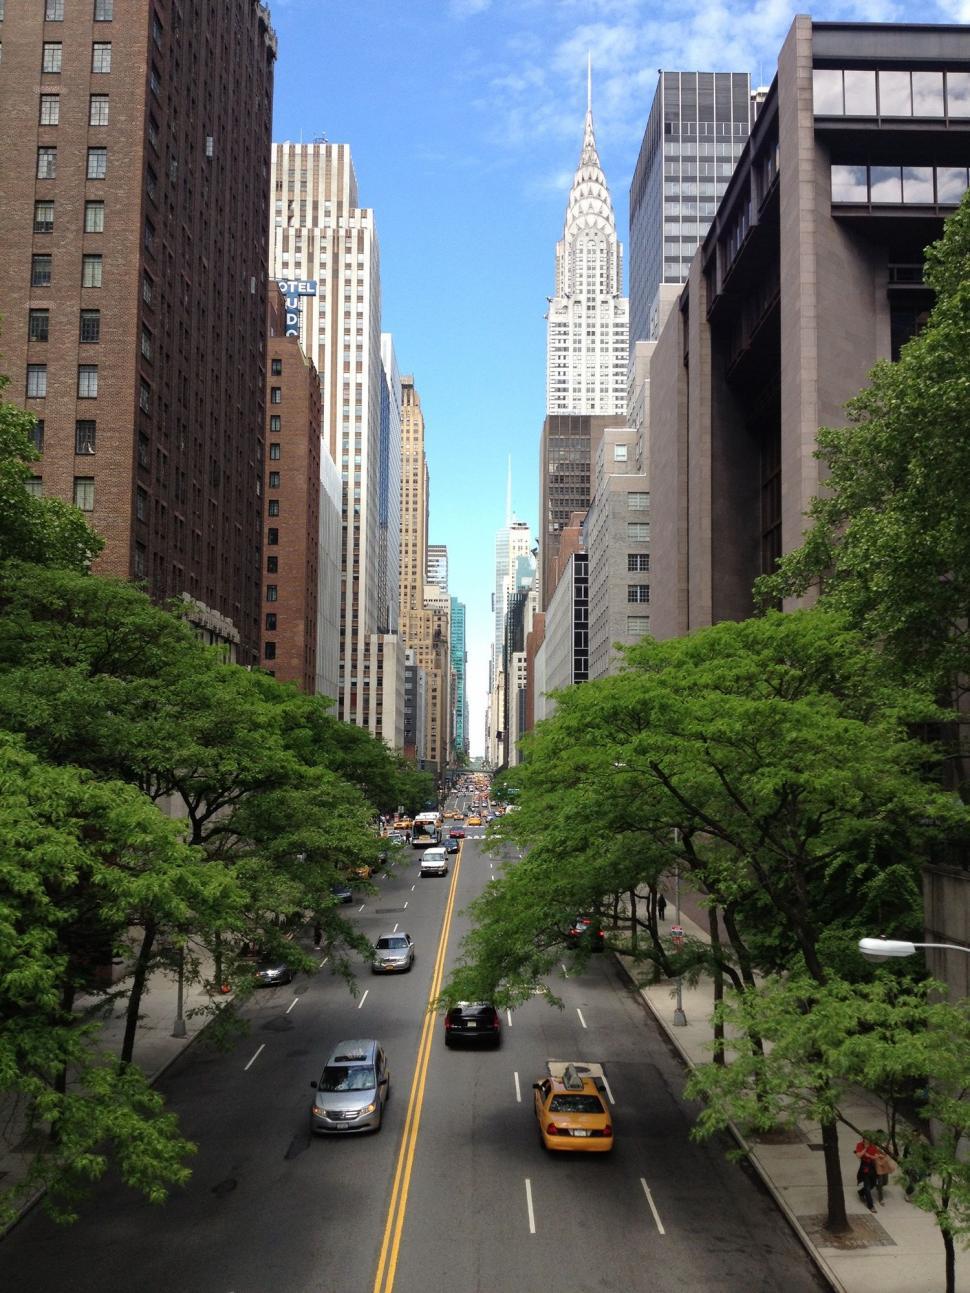 Free Image of Urban Street With Tall Buildings and Trees 